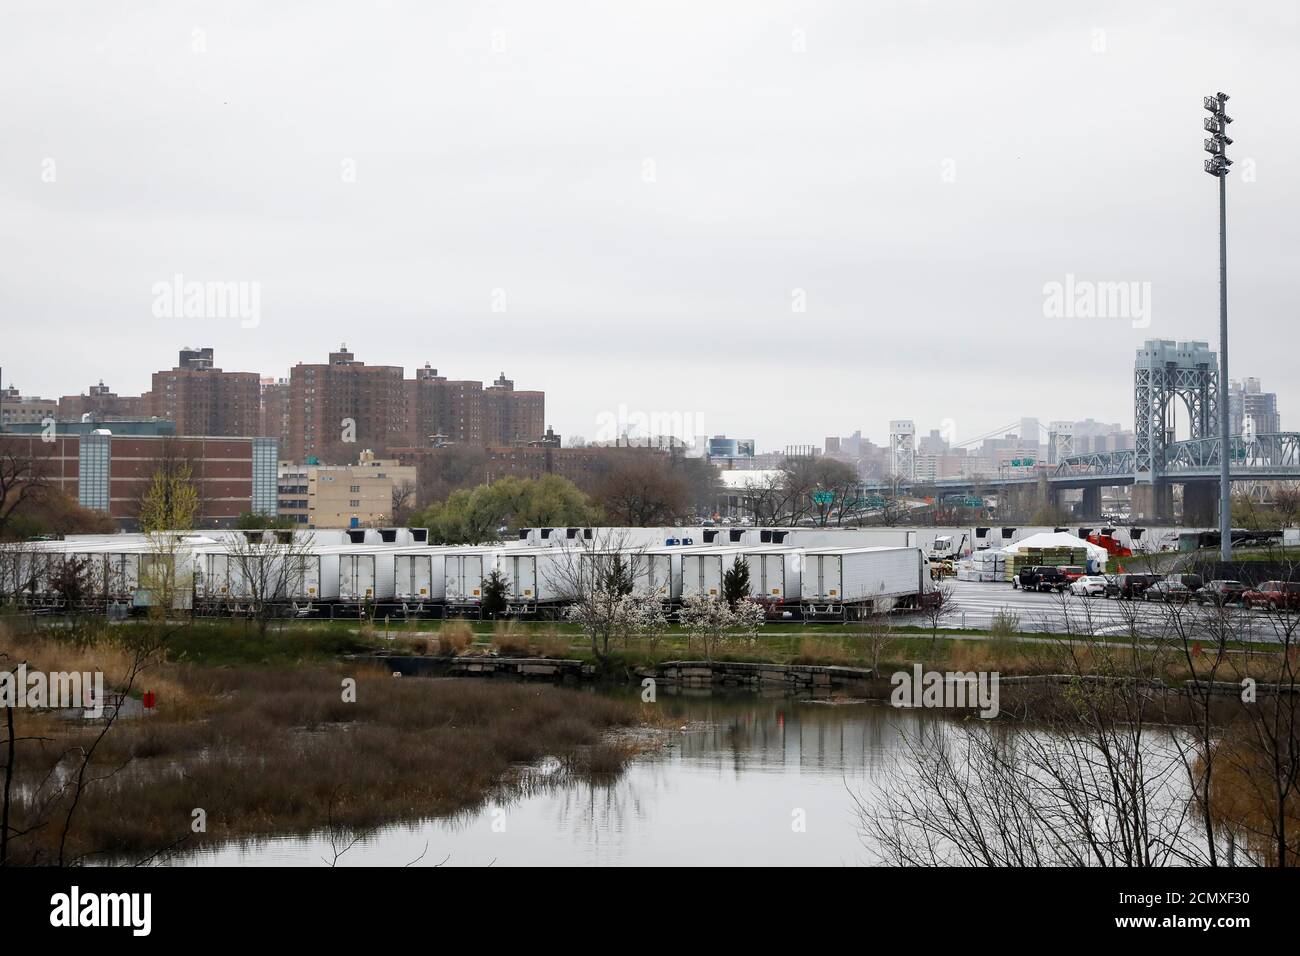 Refrigerated tractor trailers that can be used as morgues are seen, amid the coronavirus disease (COVID-19) outbreak, outside Icahn Stadium on Randall's Island in New York City, U.S., April 9, 2020. REUTERS/Brendan McDermid Stock Photo